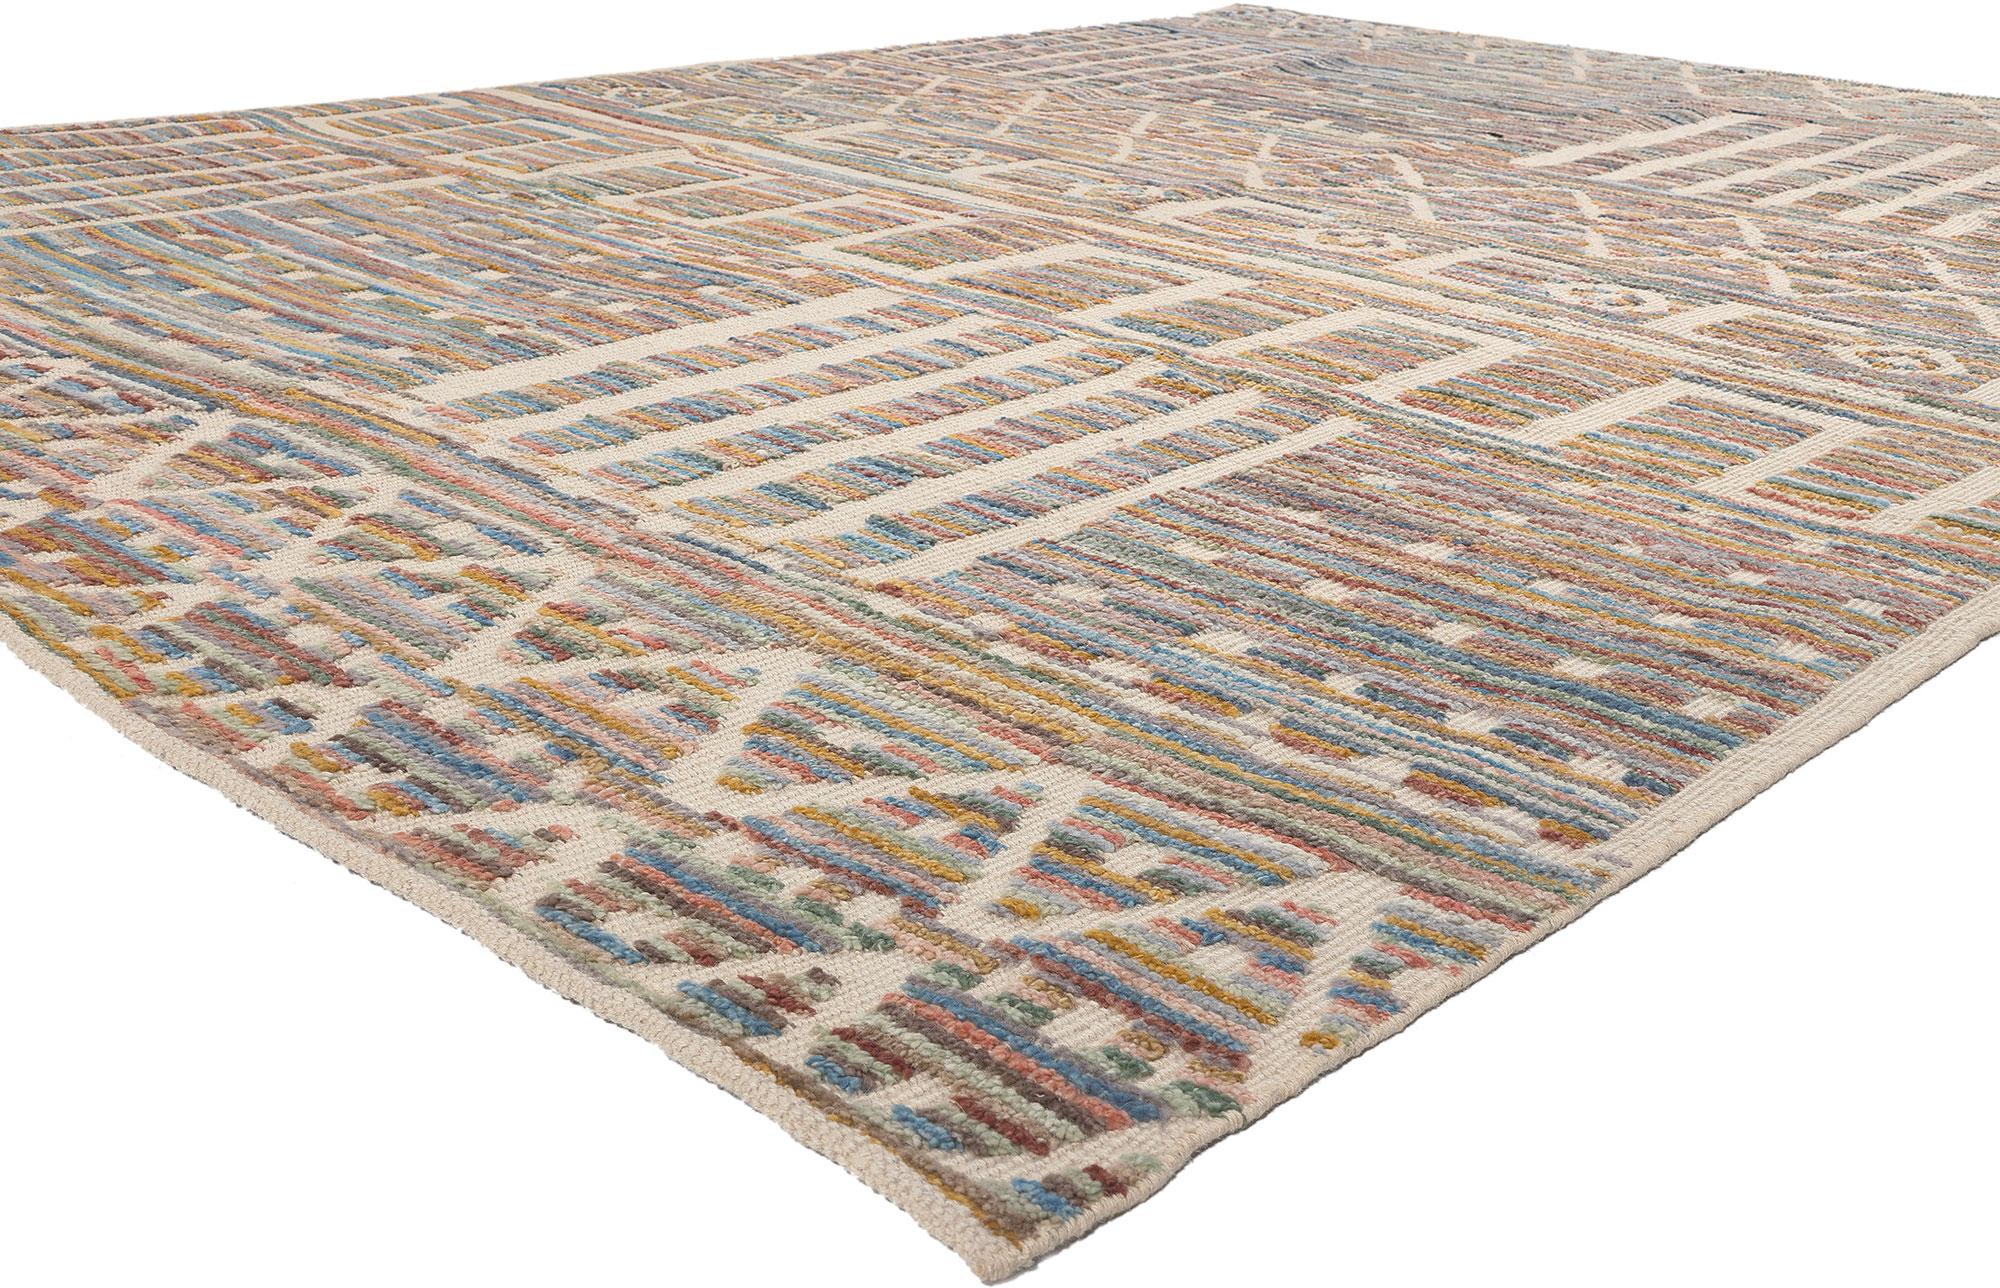 80995 Colorful Modern Moroccan Rug, 08'09 x 12'03. Boho Chic meets tribal enchantment in this hand-knotted wool modern Moroccan area rug, where vibrant creativity intertwines with traditional craftsmanship. The rug's colorful striated backdrop